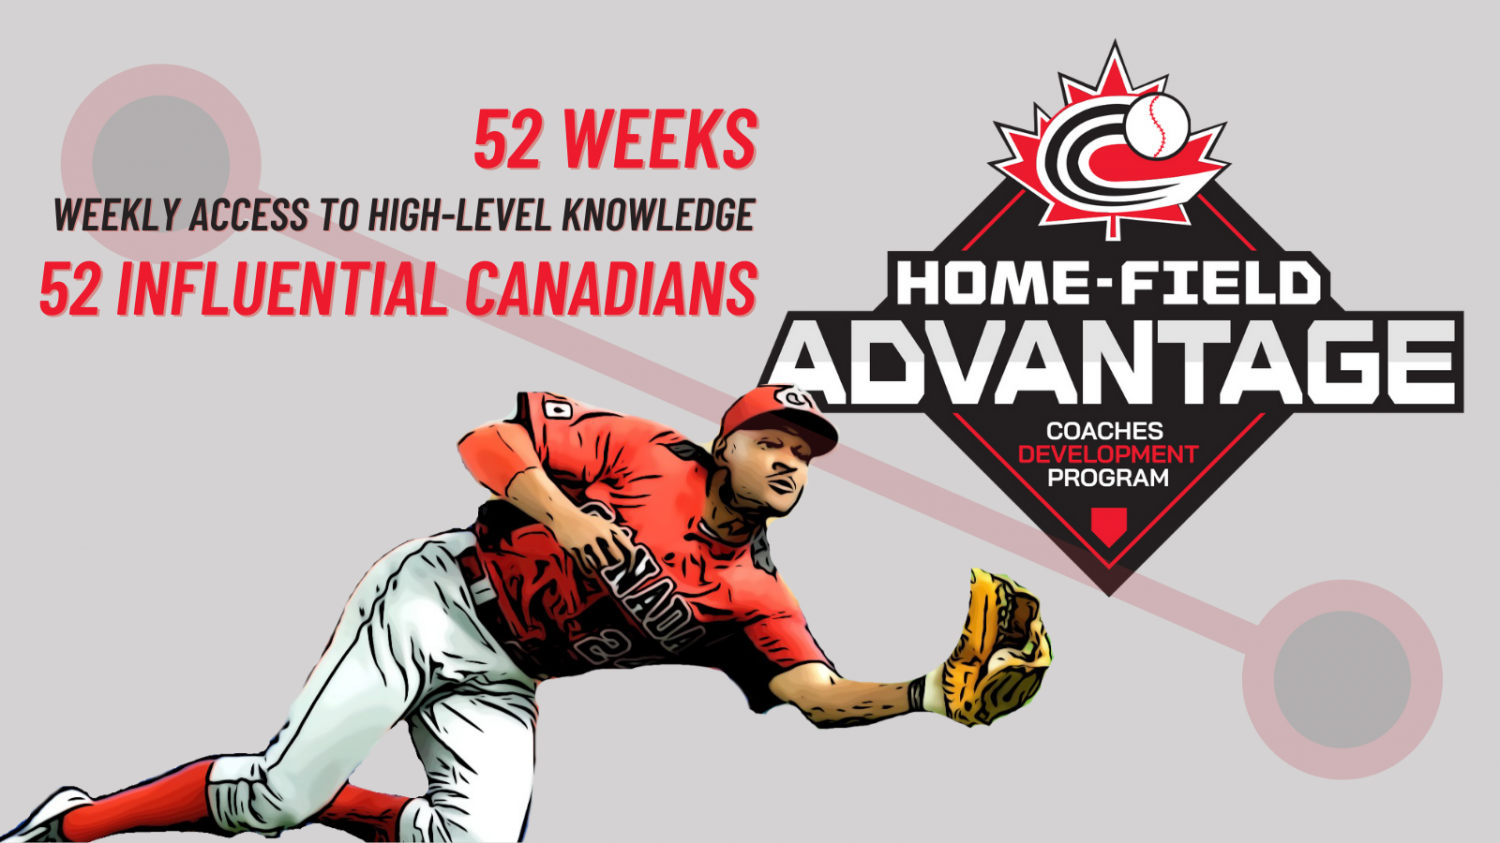 INTRODUCING HOME-FIELD ADVANTAGE! Calling all coaches! (from Baseball Canada)